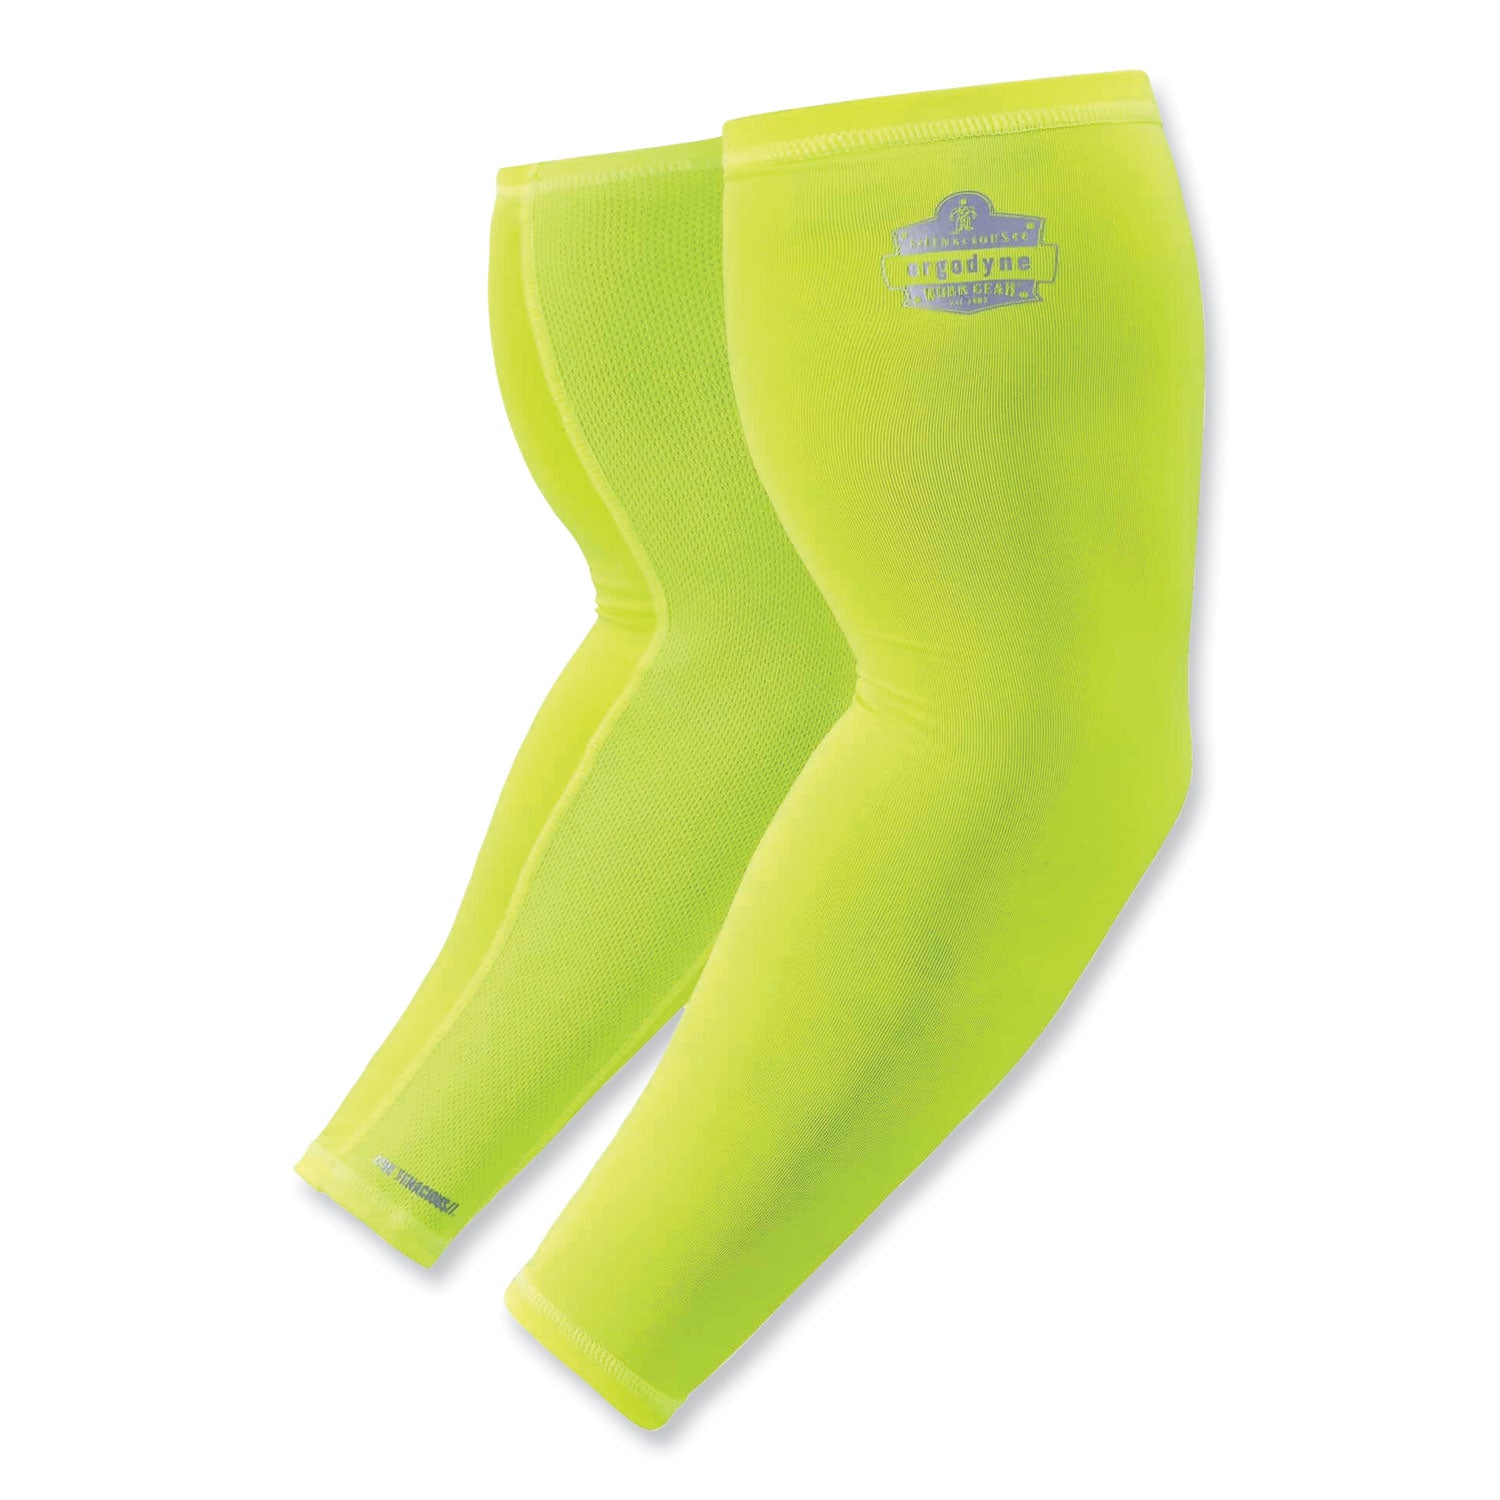 chill-its-6690-performance-knit-cooling-arm-sleeve-polyester-spandex-x-large-lime-2-sleeves-ships-in-1-3-business-days_ego12285 - 1